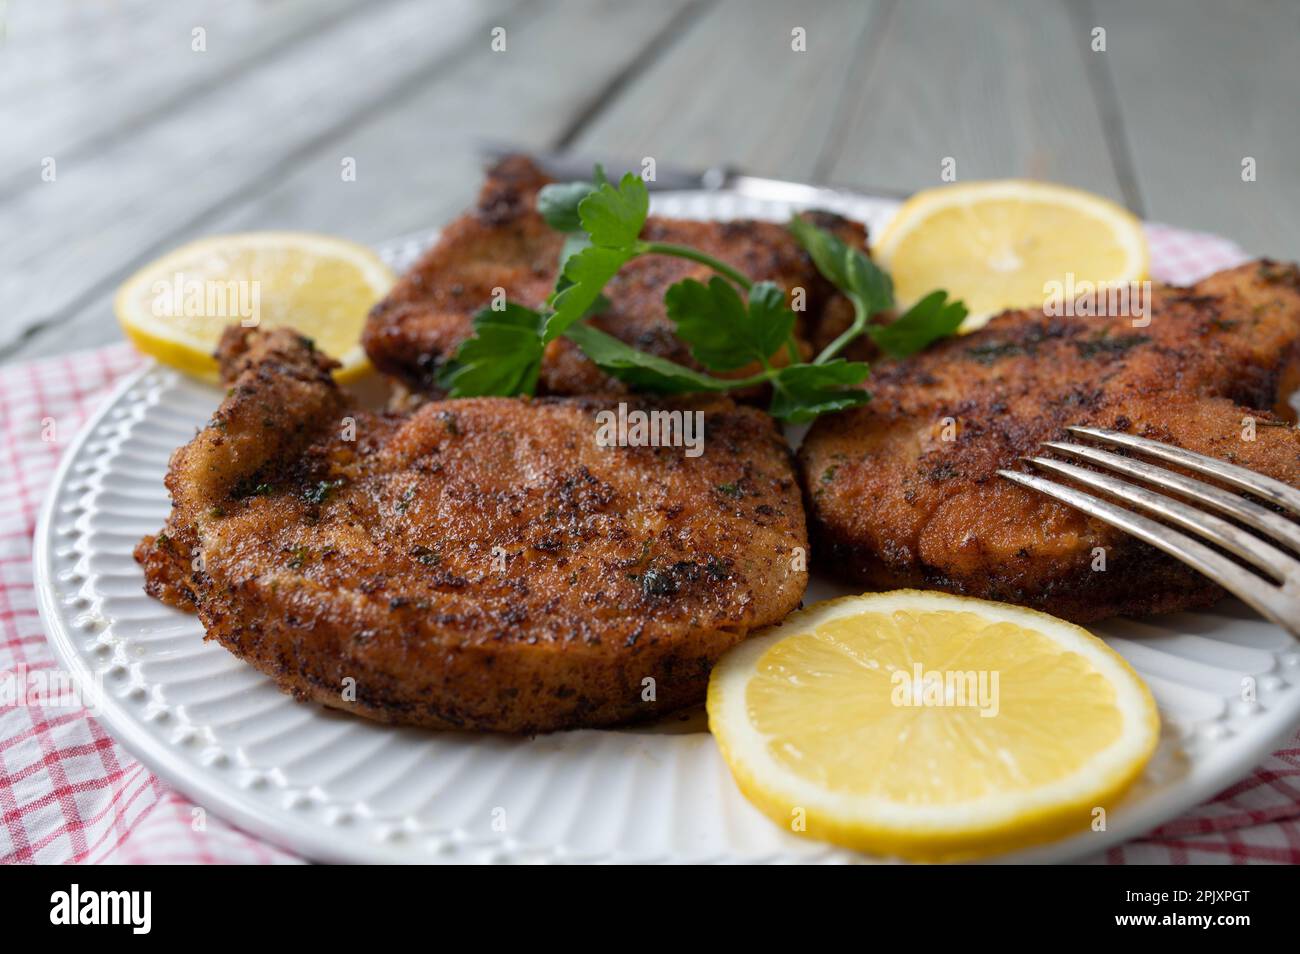 Breaded pork chops with parmesan, parsley crust on a plate with lemon. Stock Photo